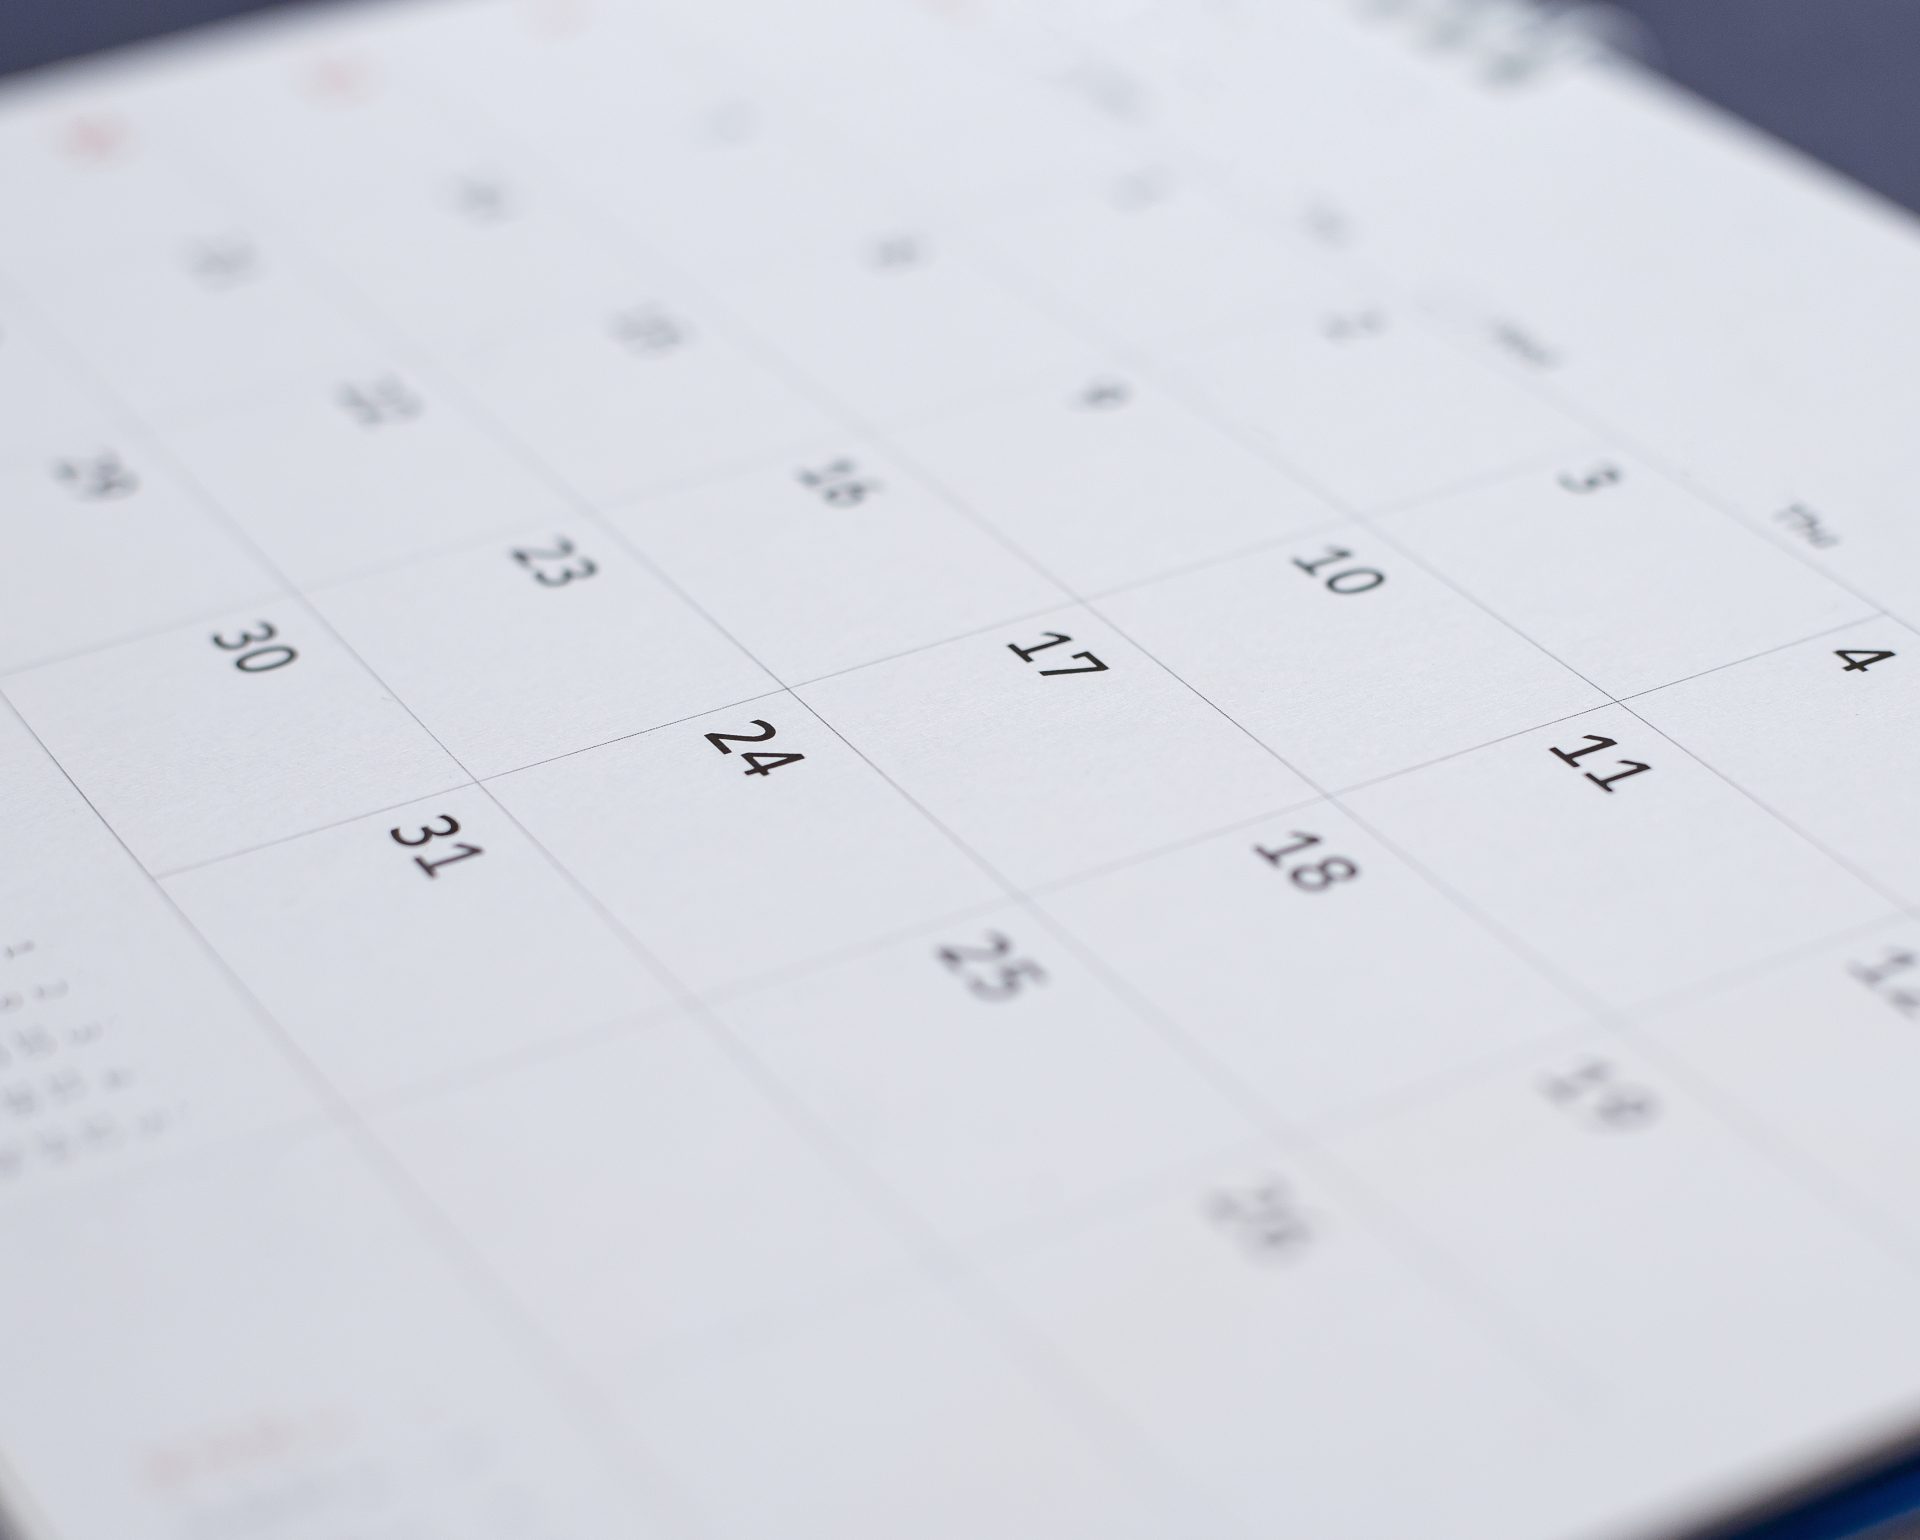 The month view of a calendar